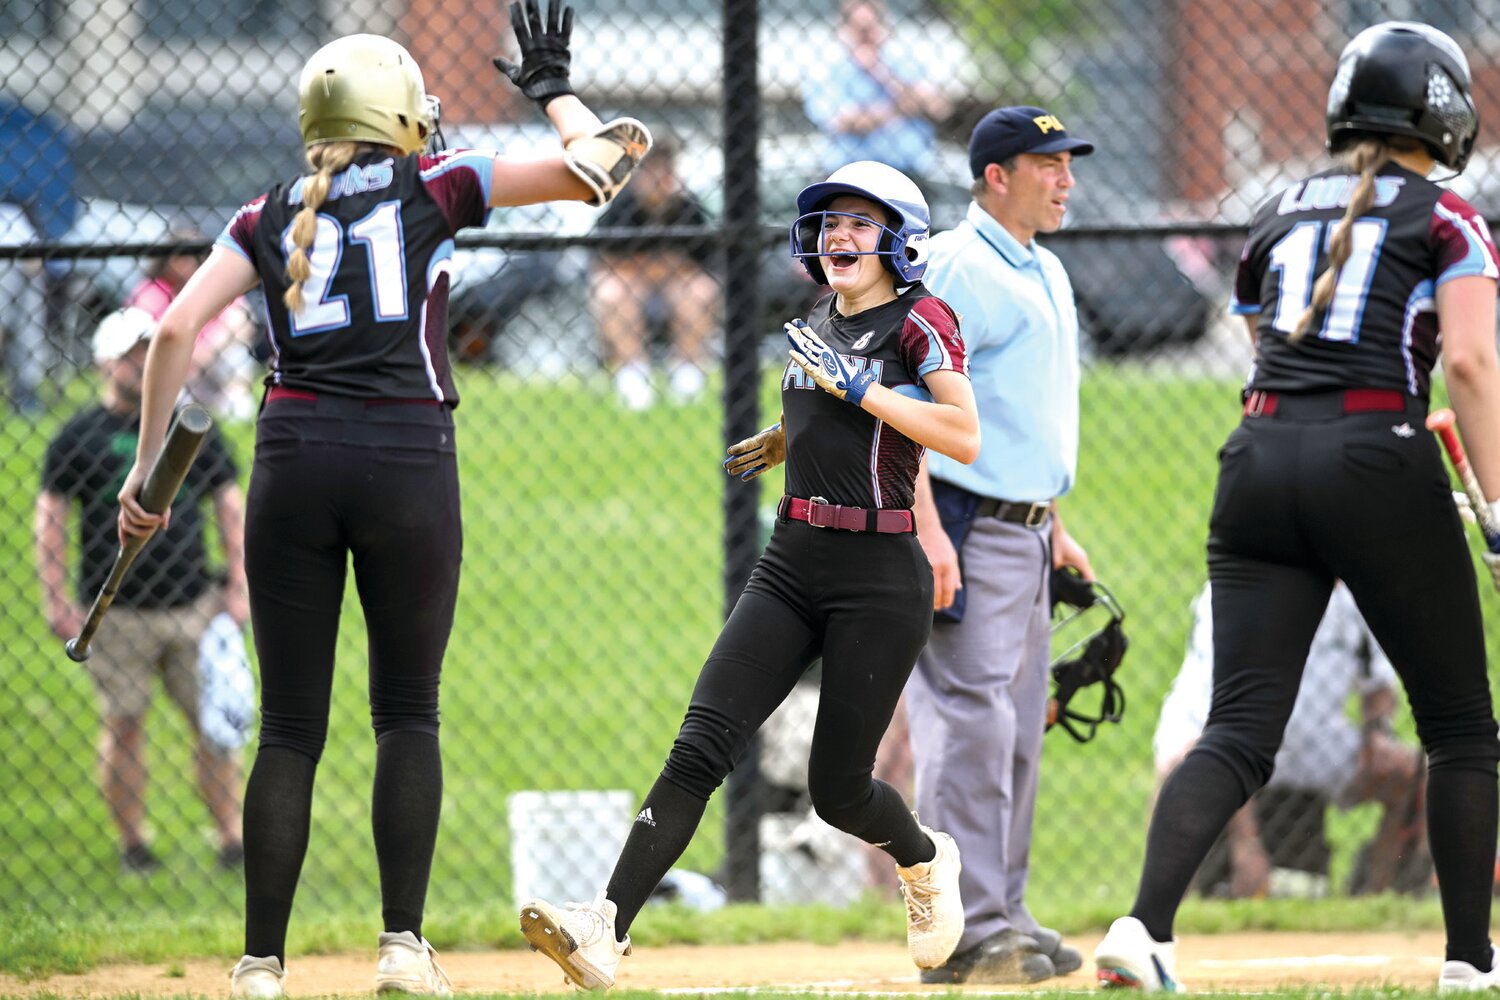 Faith Christian’s Cheyenne Greene after scoring in the third inning, putting Faith Christian up 2-1.